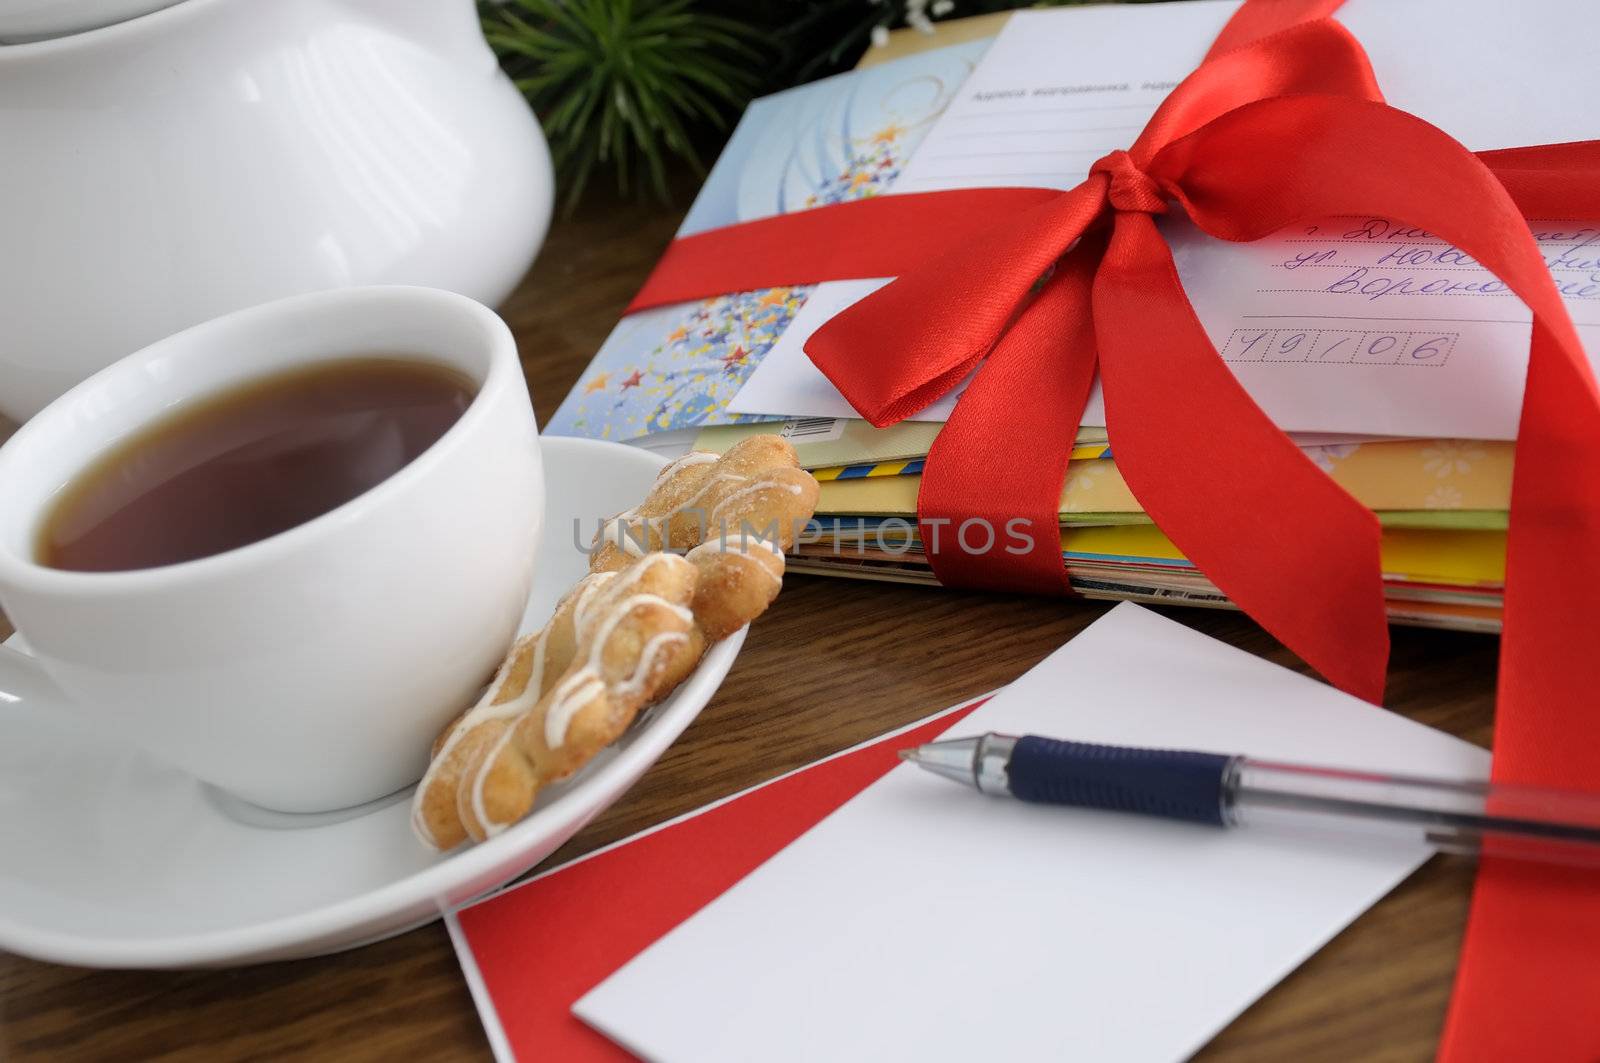 Write greeting or invite your friends and family on holiday